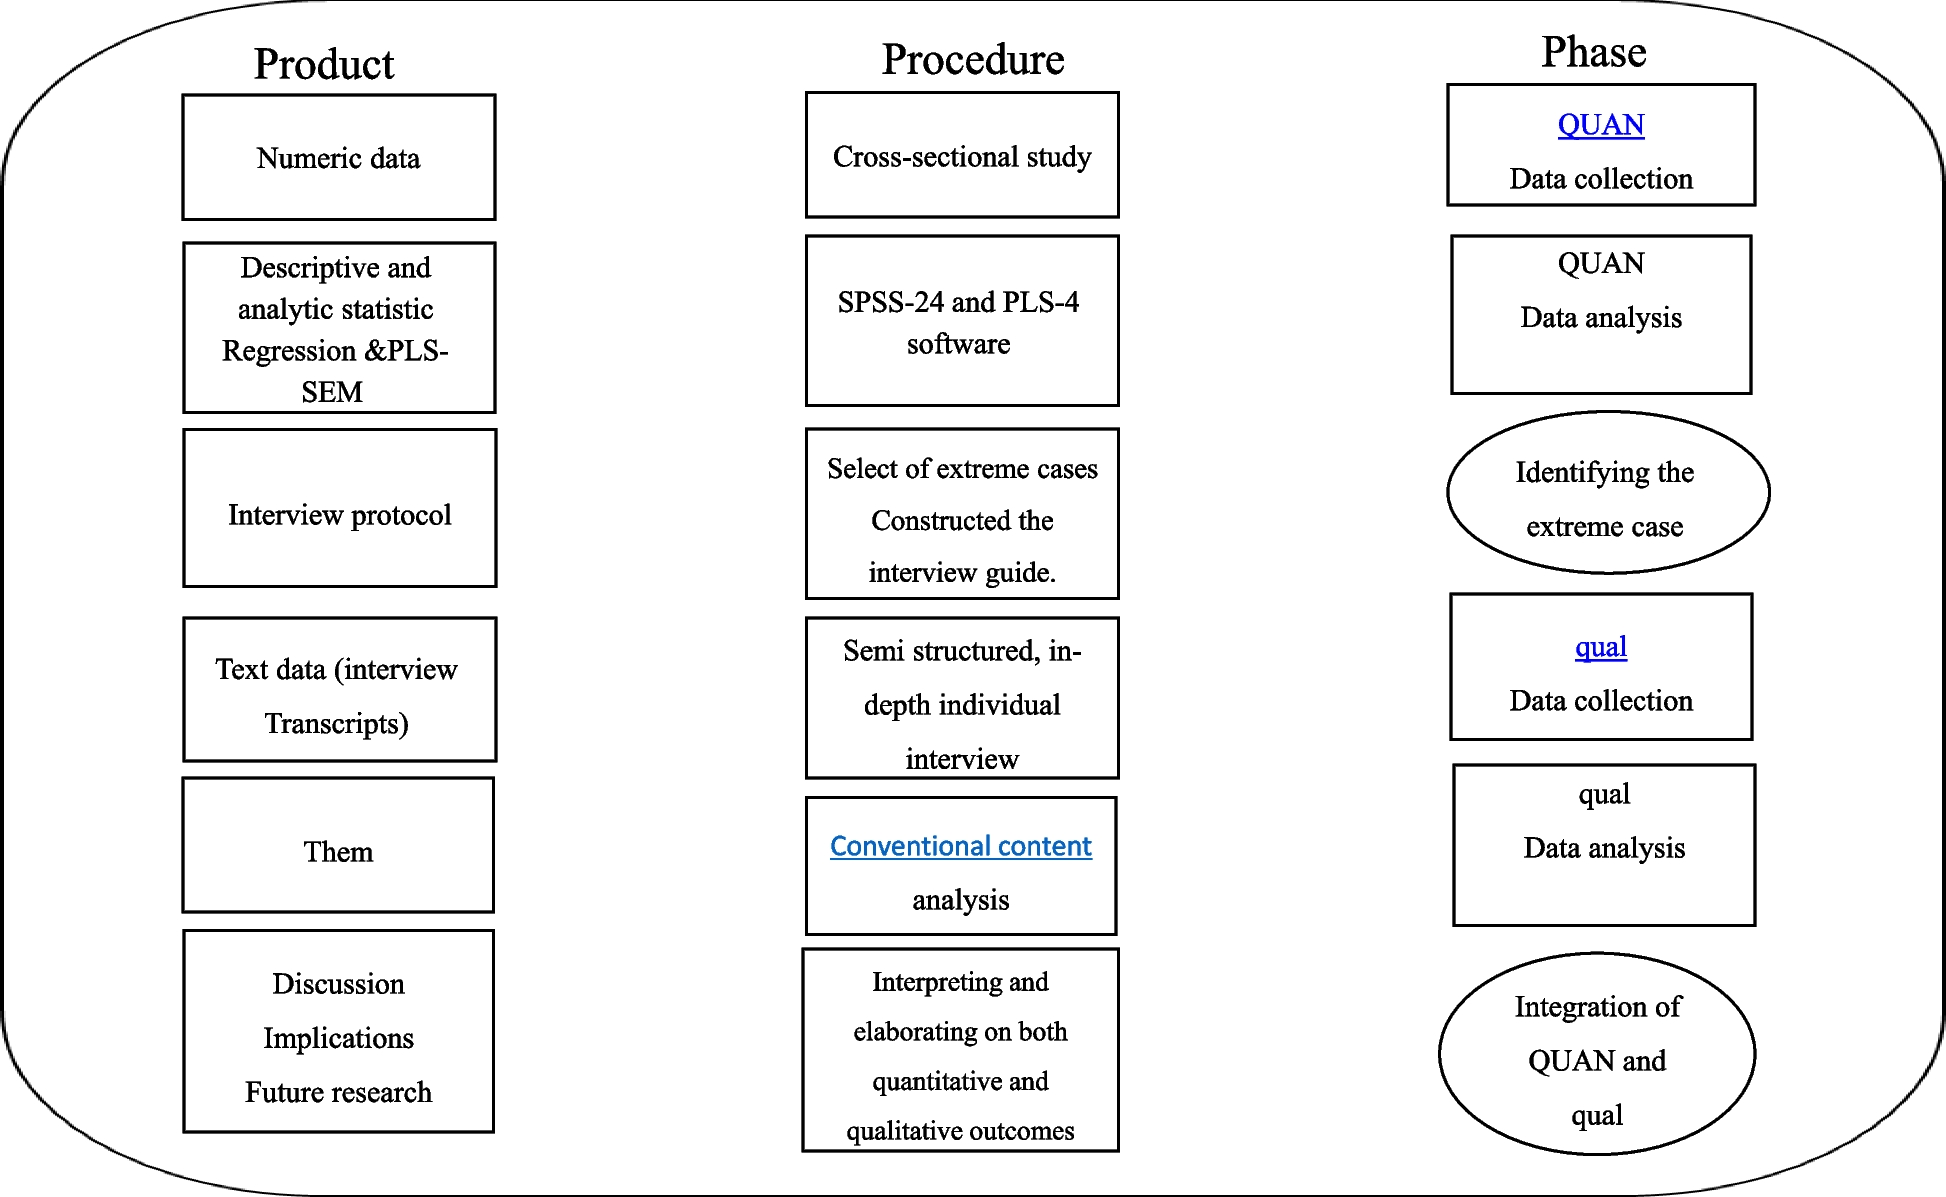 Intimate partner violence after childbirth: an explanatory sequential mixed-methods study protocol